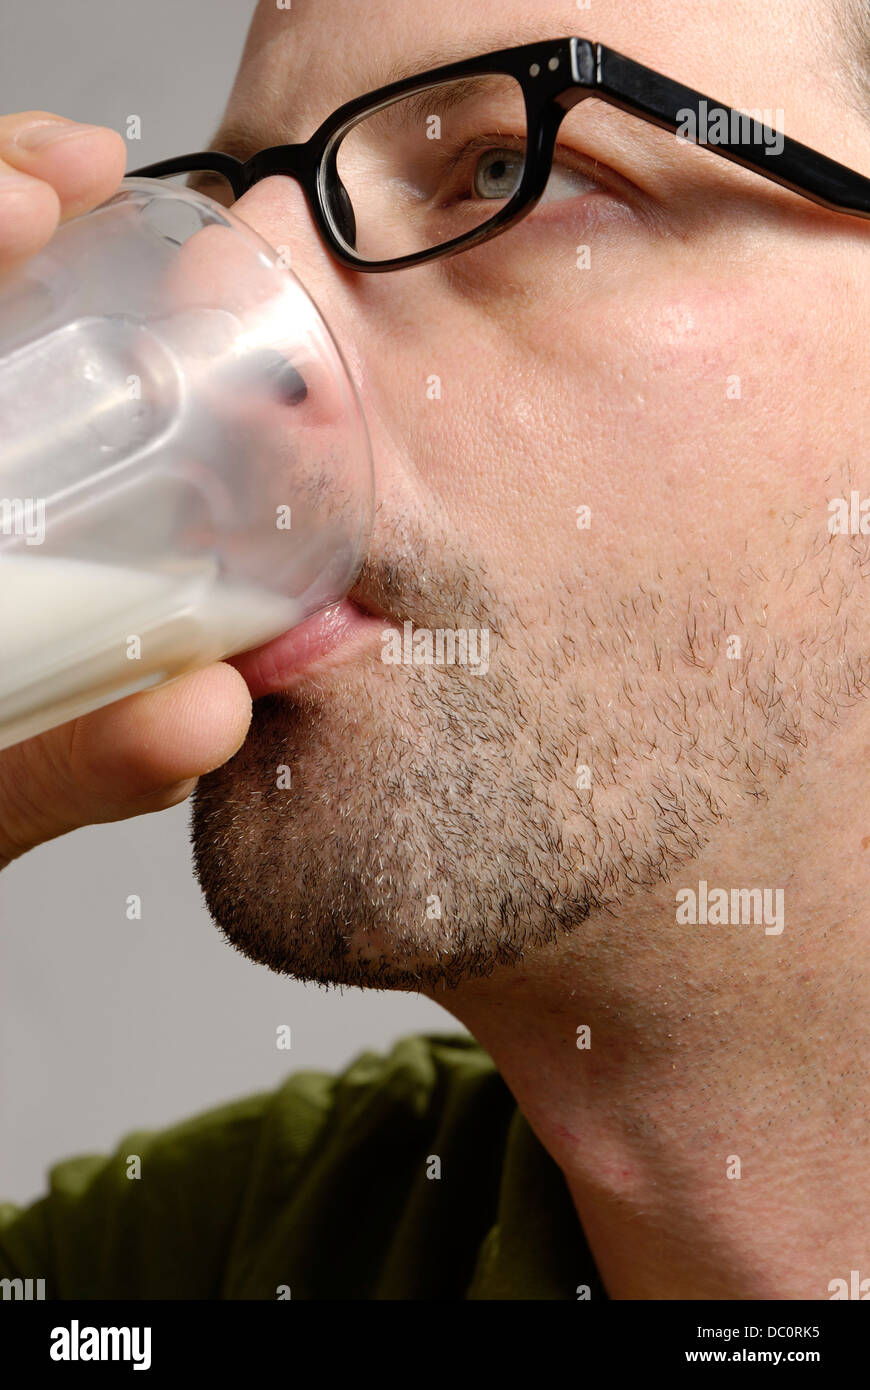 A man drinks a glass of milk Stock Photo